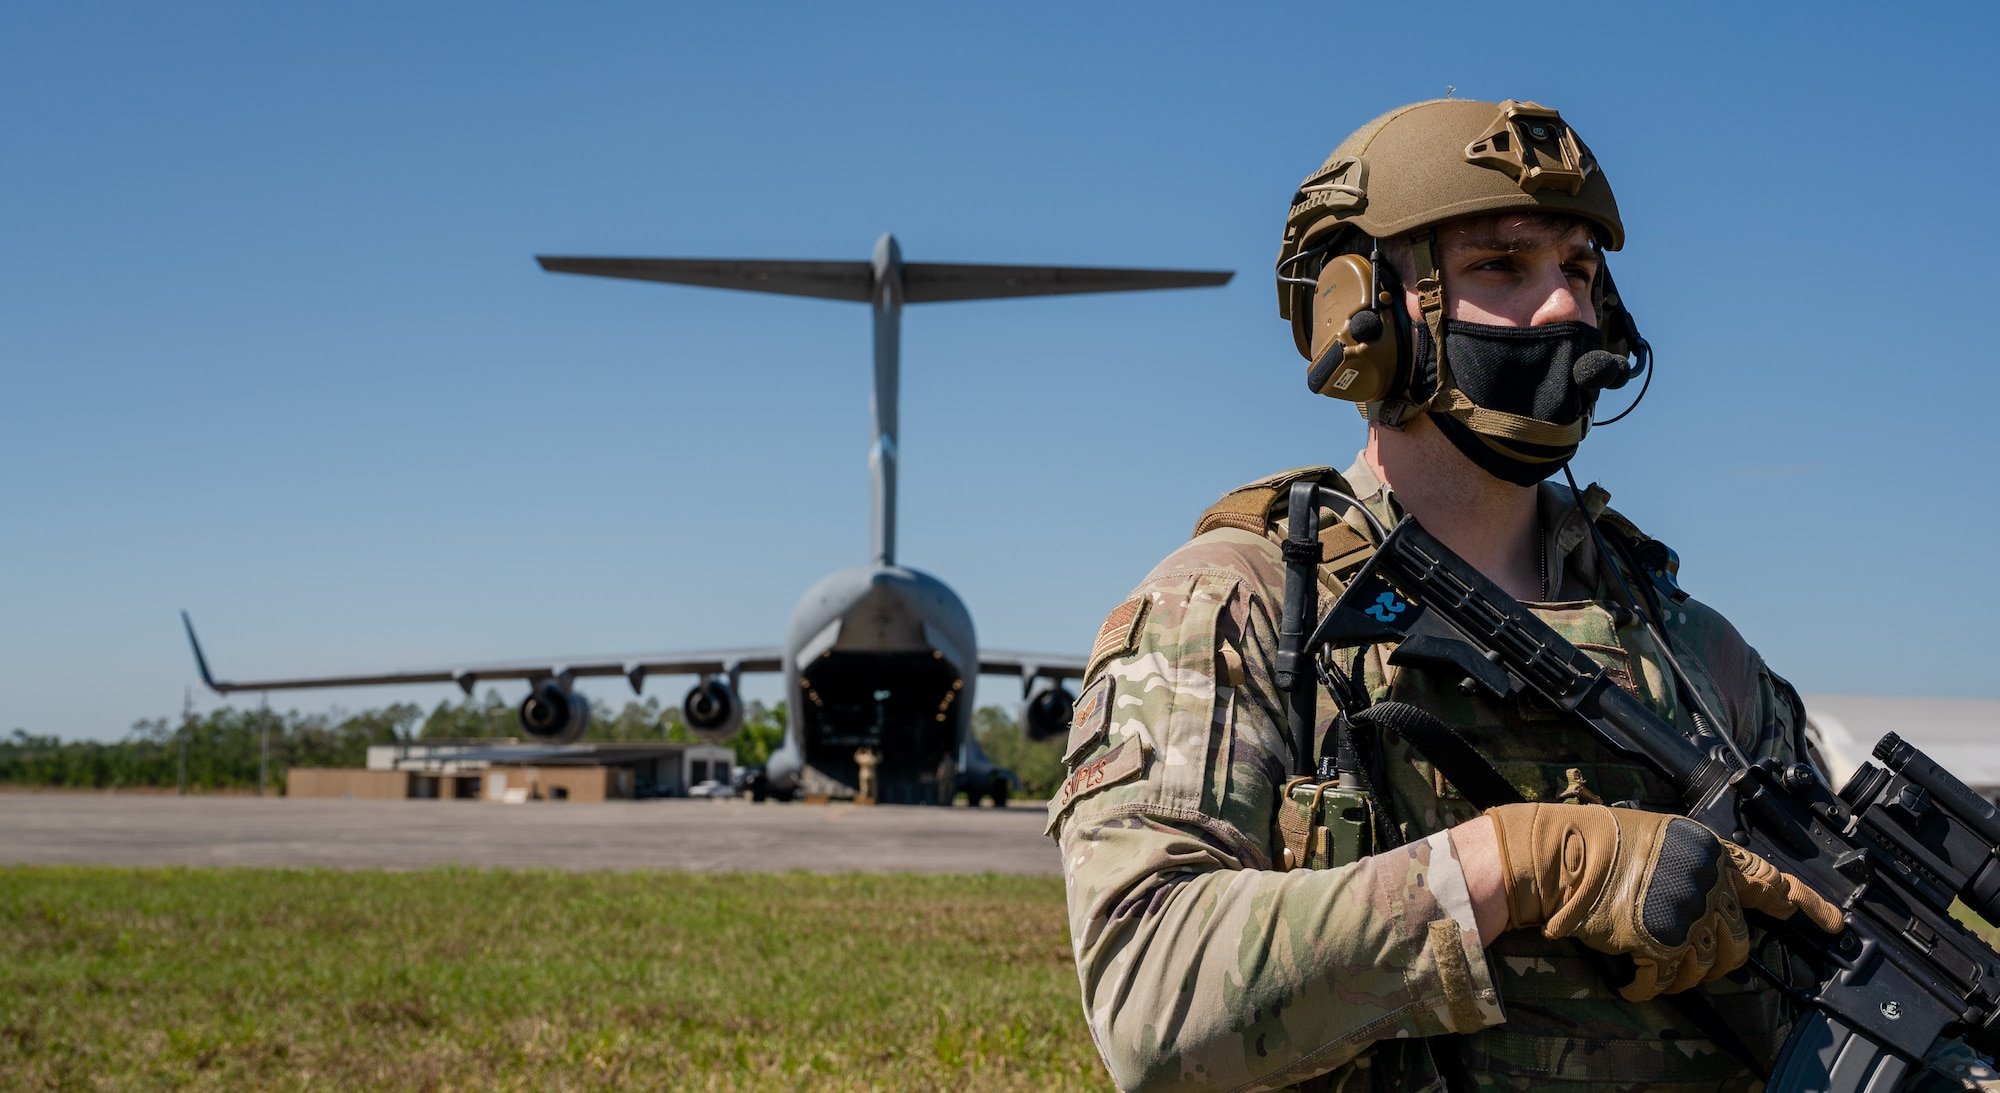 Staff Sgt. Matthew Snipes, 23rd Security Forces Squadron resource advisor, Moody Air Force Base, Georgia, guards a Dover AFB C-17 Globemaster III during Exercise Mosaic Tiger, at Avon Park Air Force Range, Florida, Feb. 23, 2021. Mosaic Tiger is an agile combat employment exercise designed to test multi-capable Airmen integrating mission-essential skills with minimal resources, so Airmen can continue to support combat operations. (U.S. Air Force photo by Airman 1st Class Faith Schaefer)